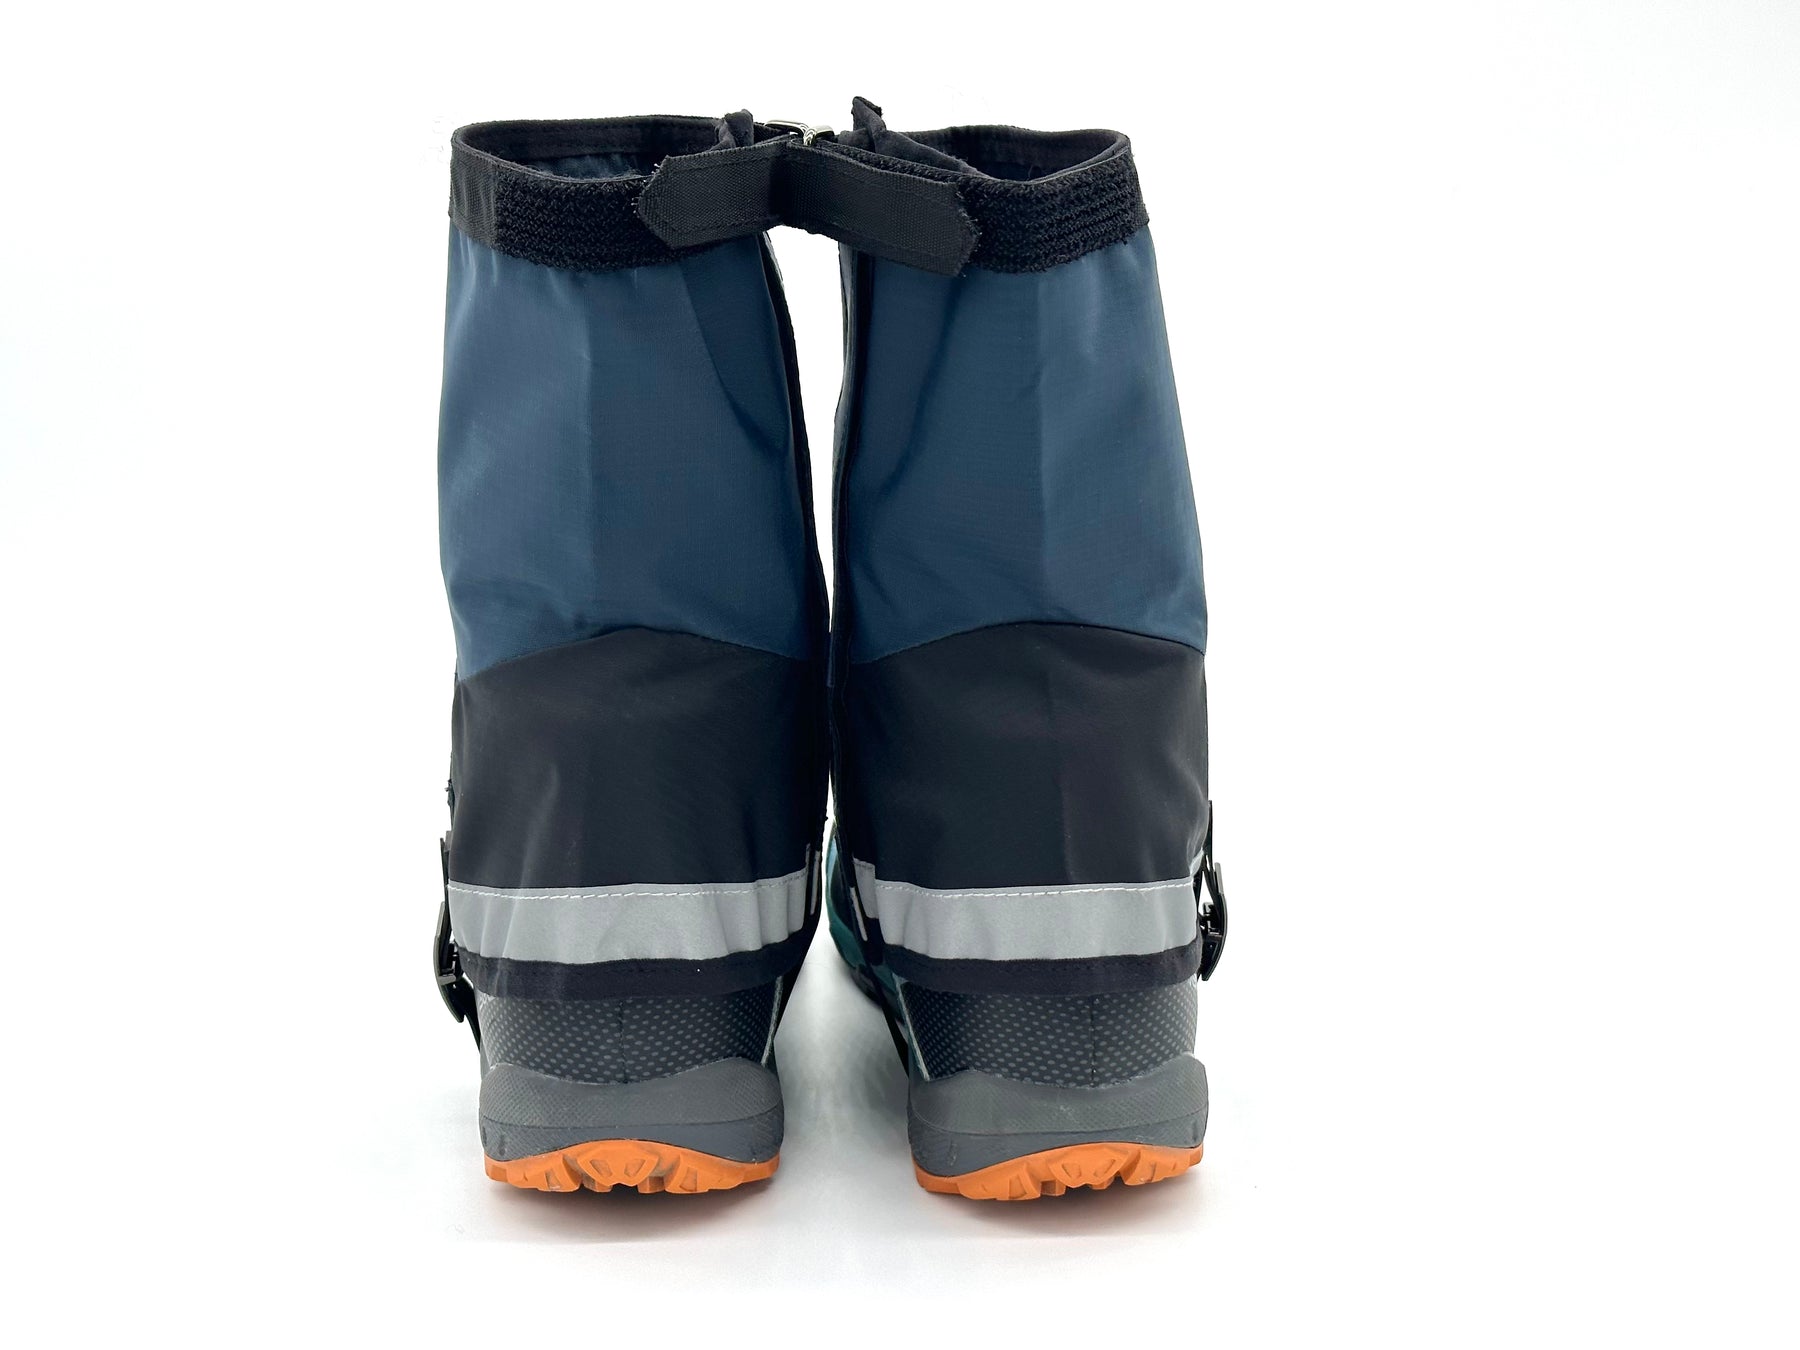 Pike Trail Leg Gaiters – Waterproof and Adjustable Snow Boot